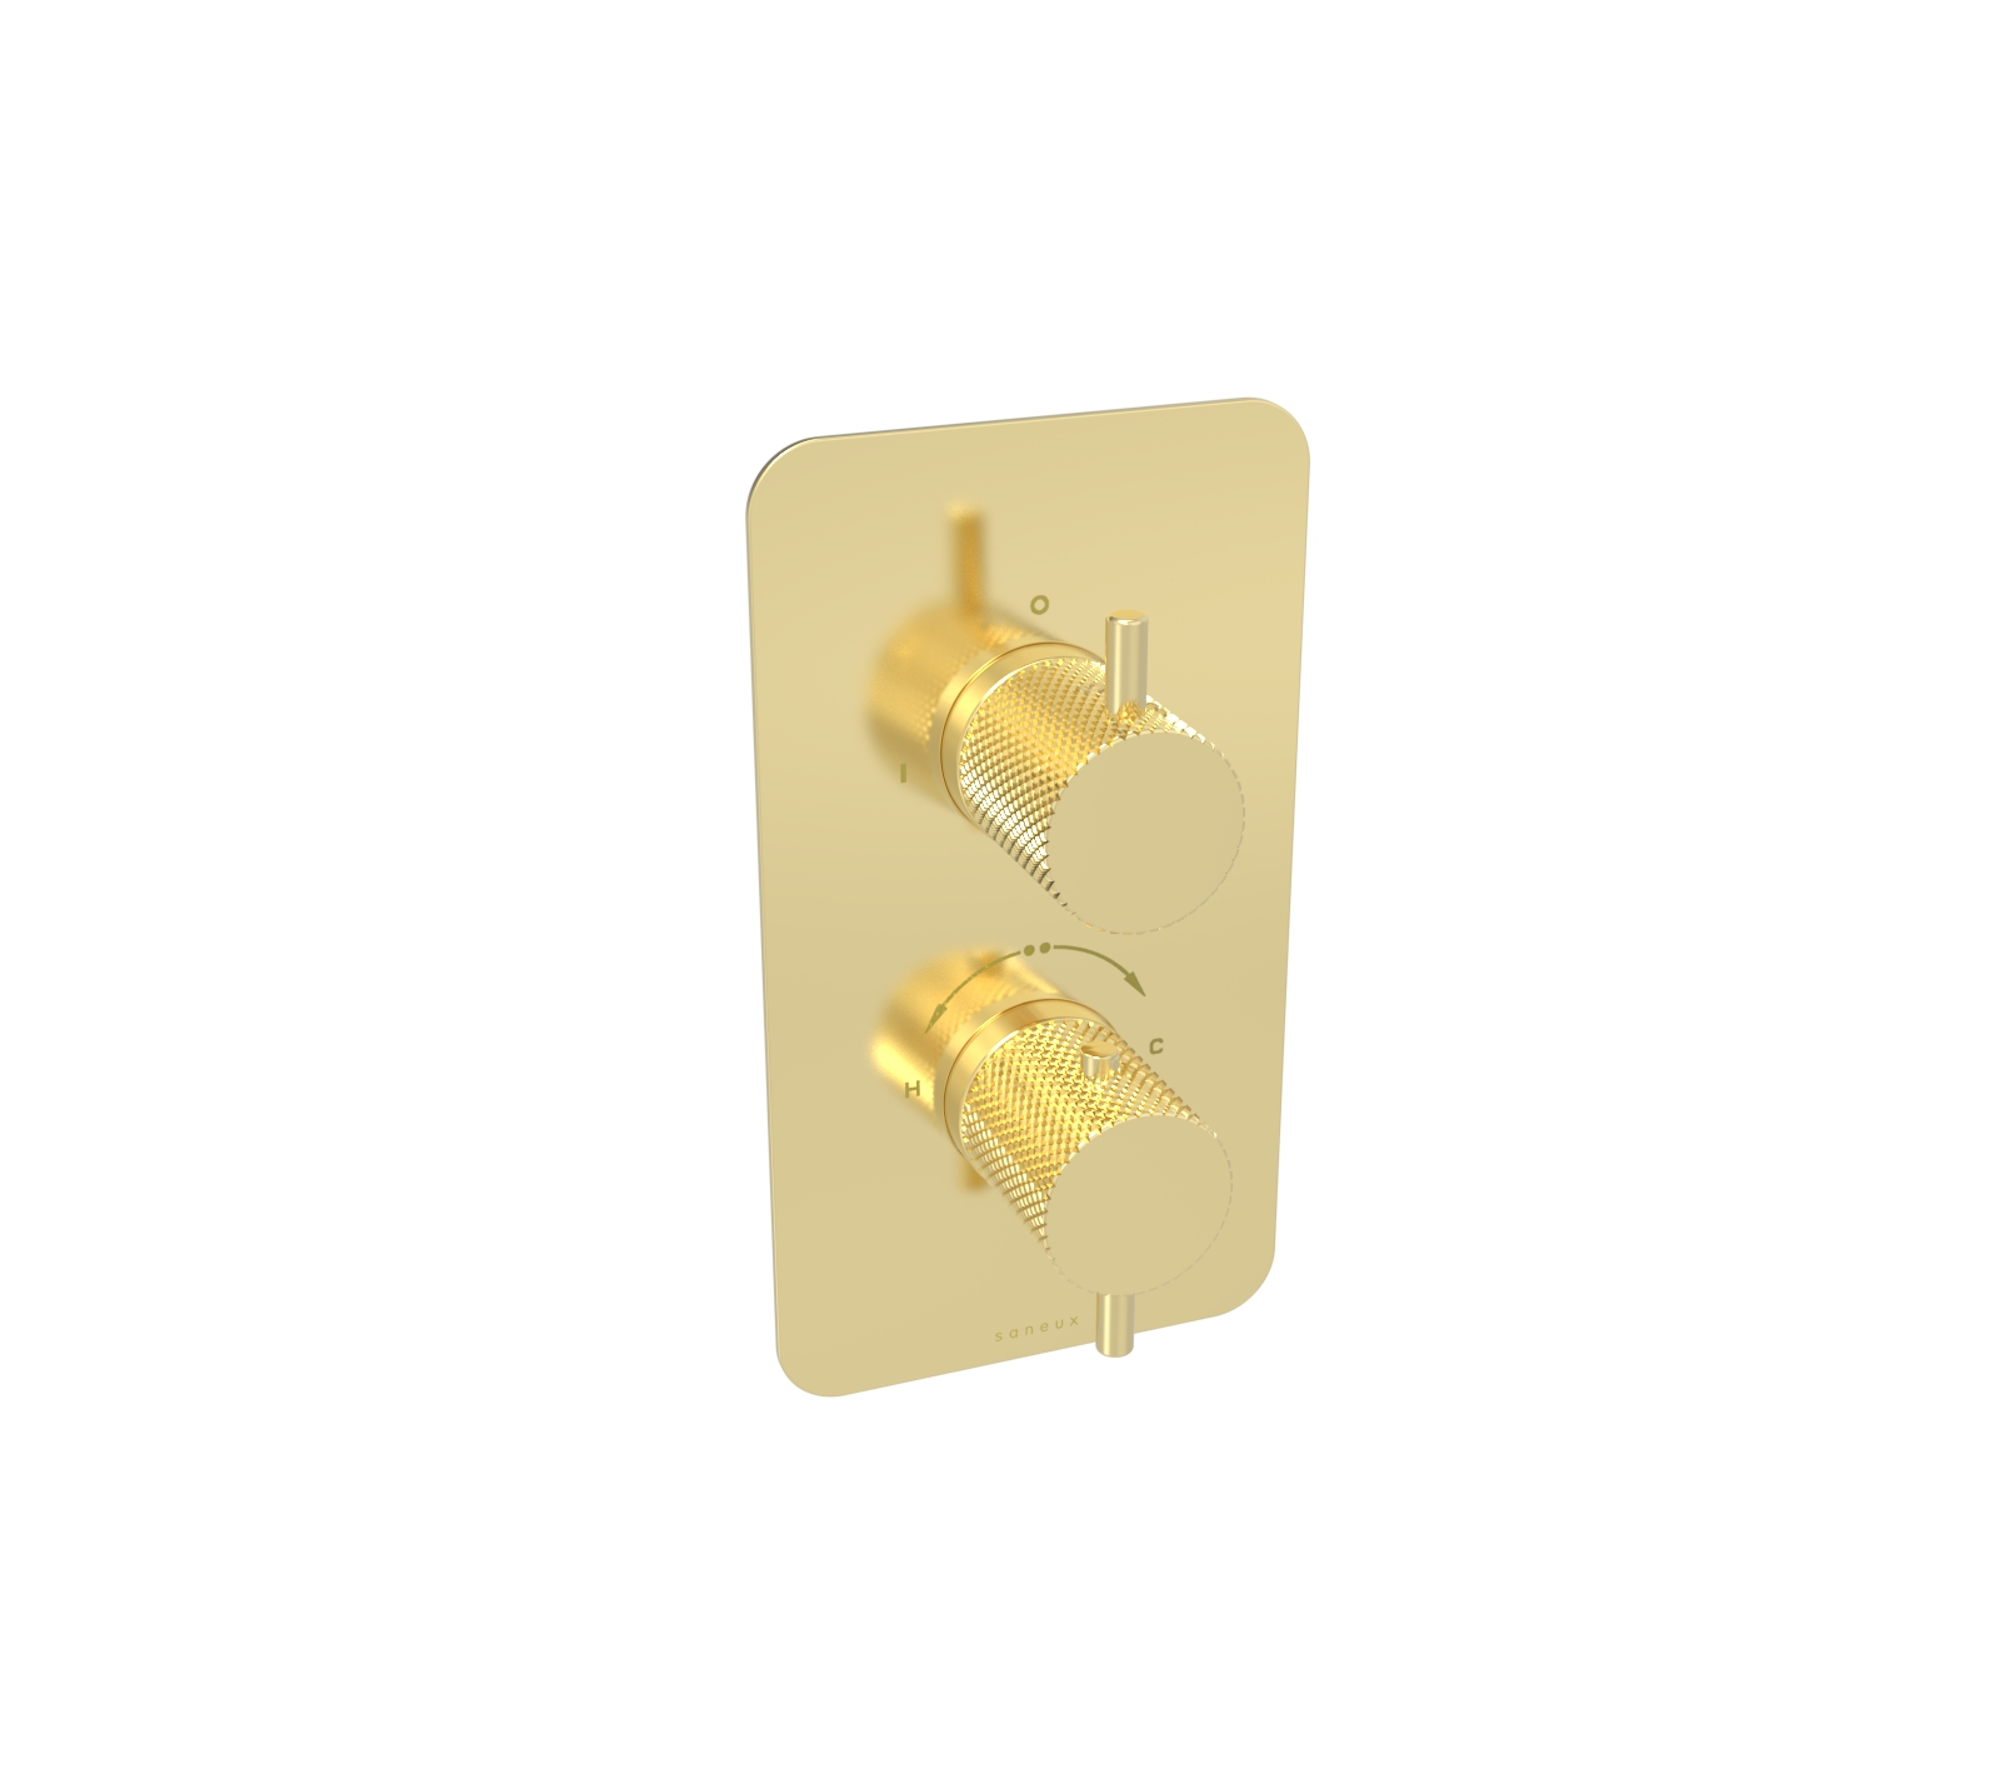 COS 2 way thermostatic shower valve kit with knurled handles - Brushed Brass